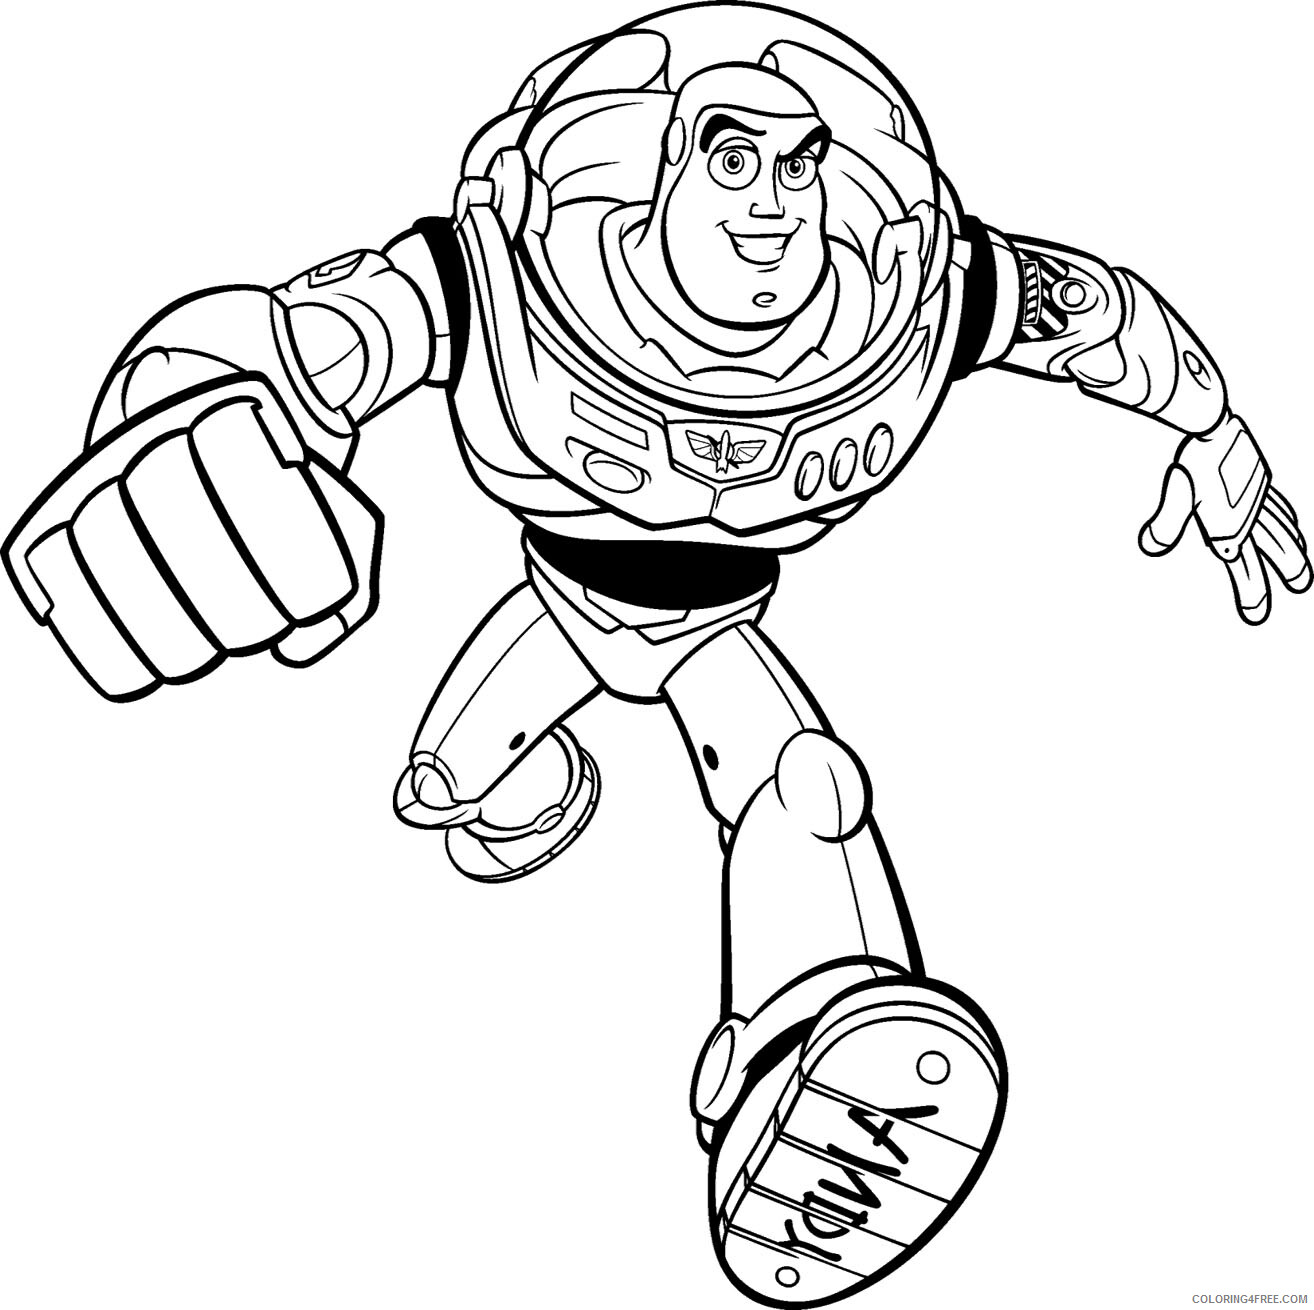 Buzz Lightyear Coloring Pages TV Film Buzz Lightyear Printable 2020 01738 Coloring4free